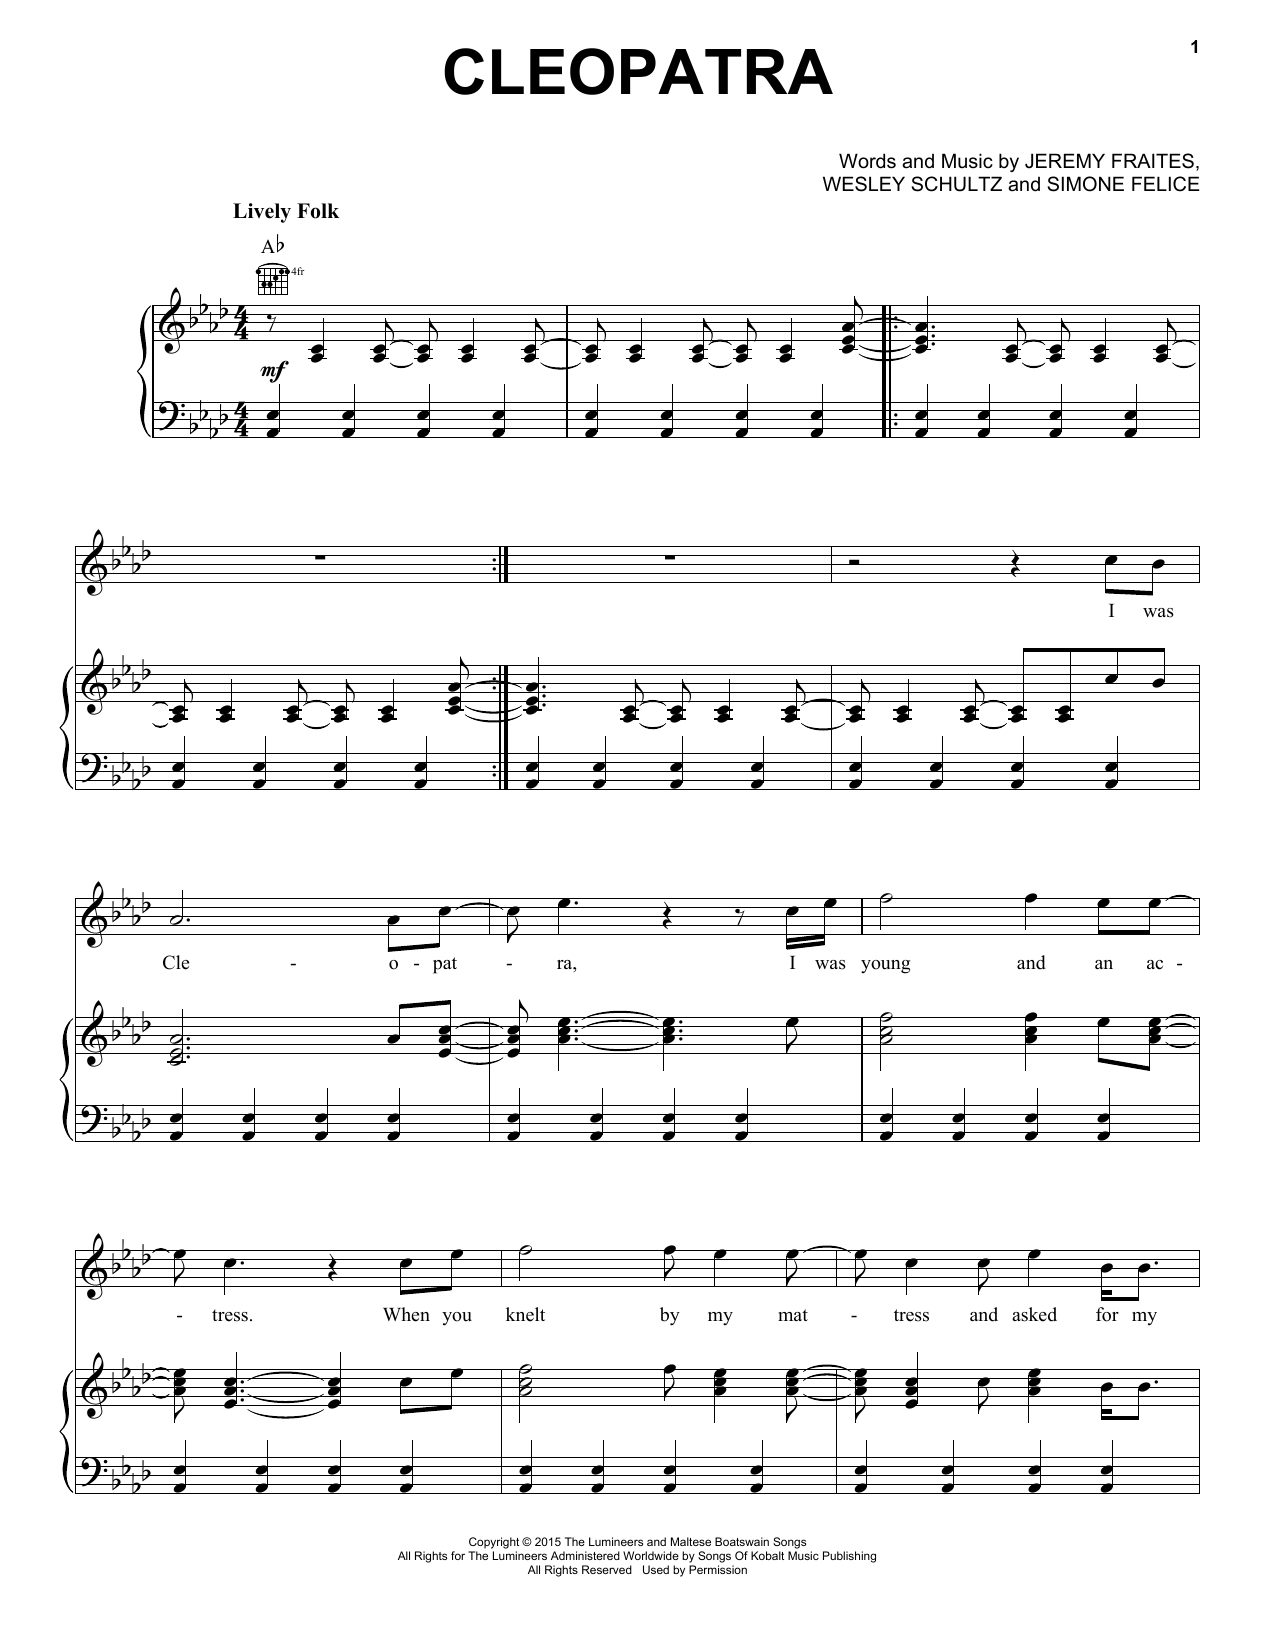 Download The Lumineers Cleopatra Sheet Music